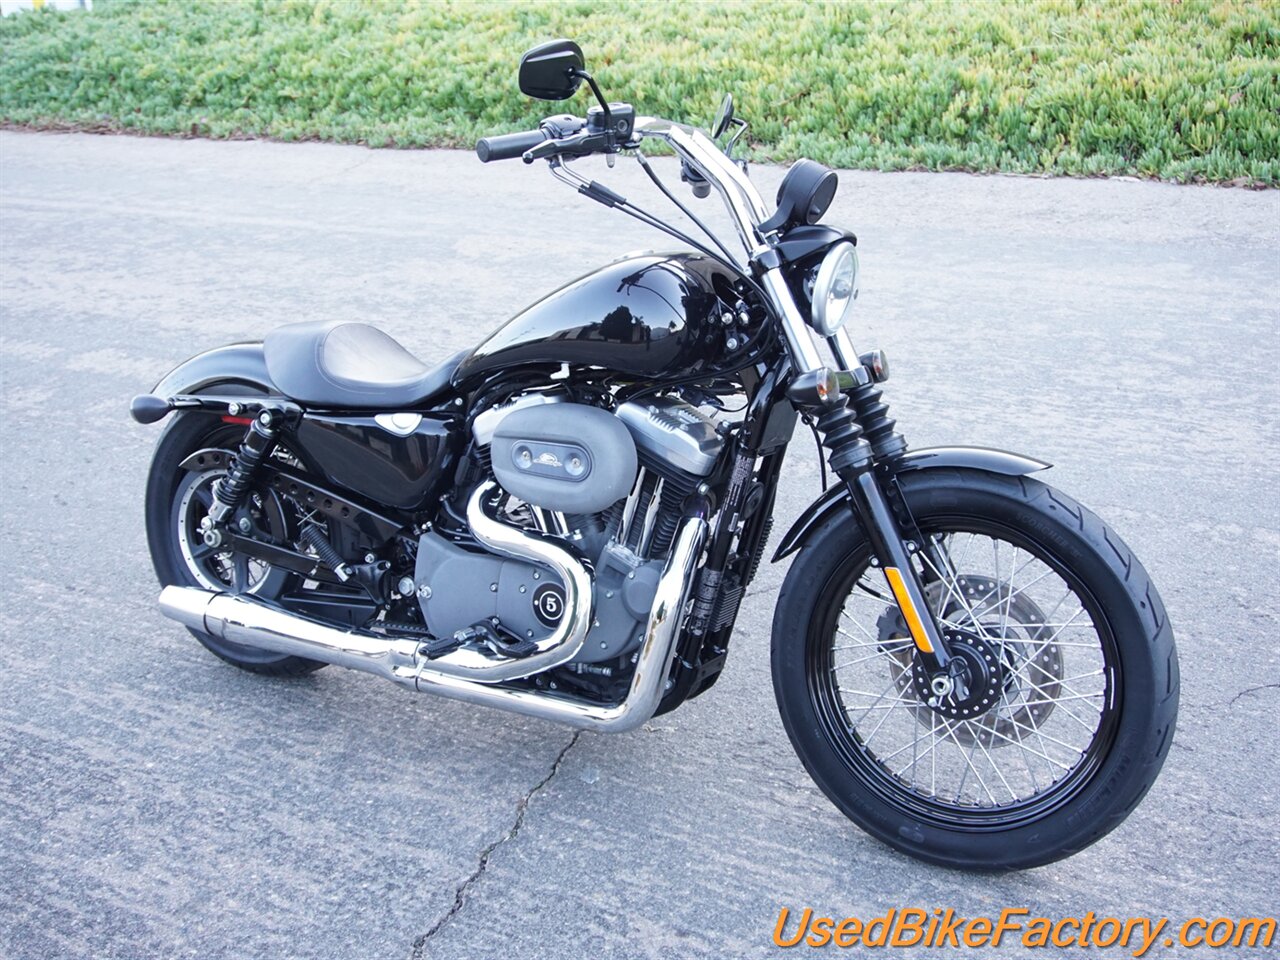 Replacement For HARLEY DAVIDSON XL1200N SPORTSTER 1200 NIGHTSTER STREET  MOTORCYCLE YEAR 2012 1200CC STARTER 並行輸入品 通販